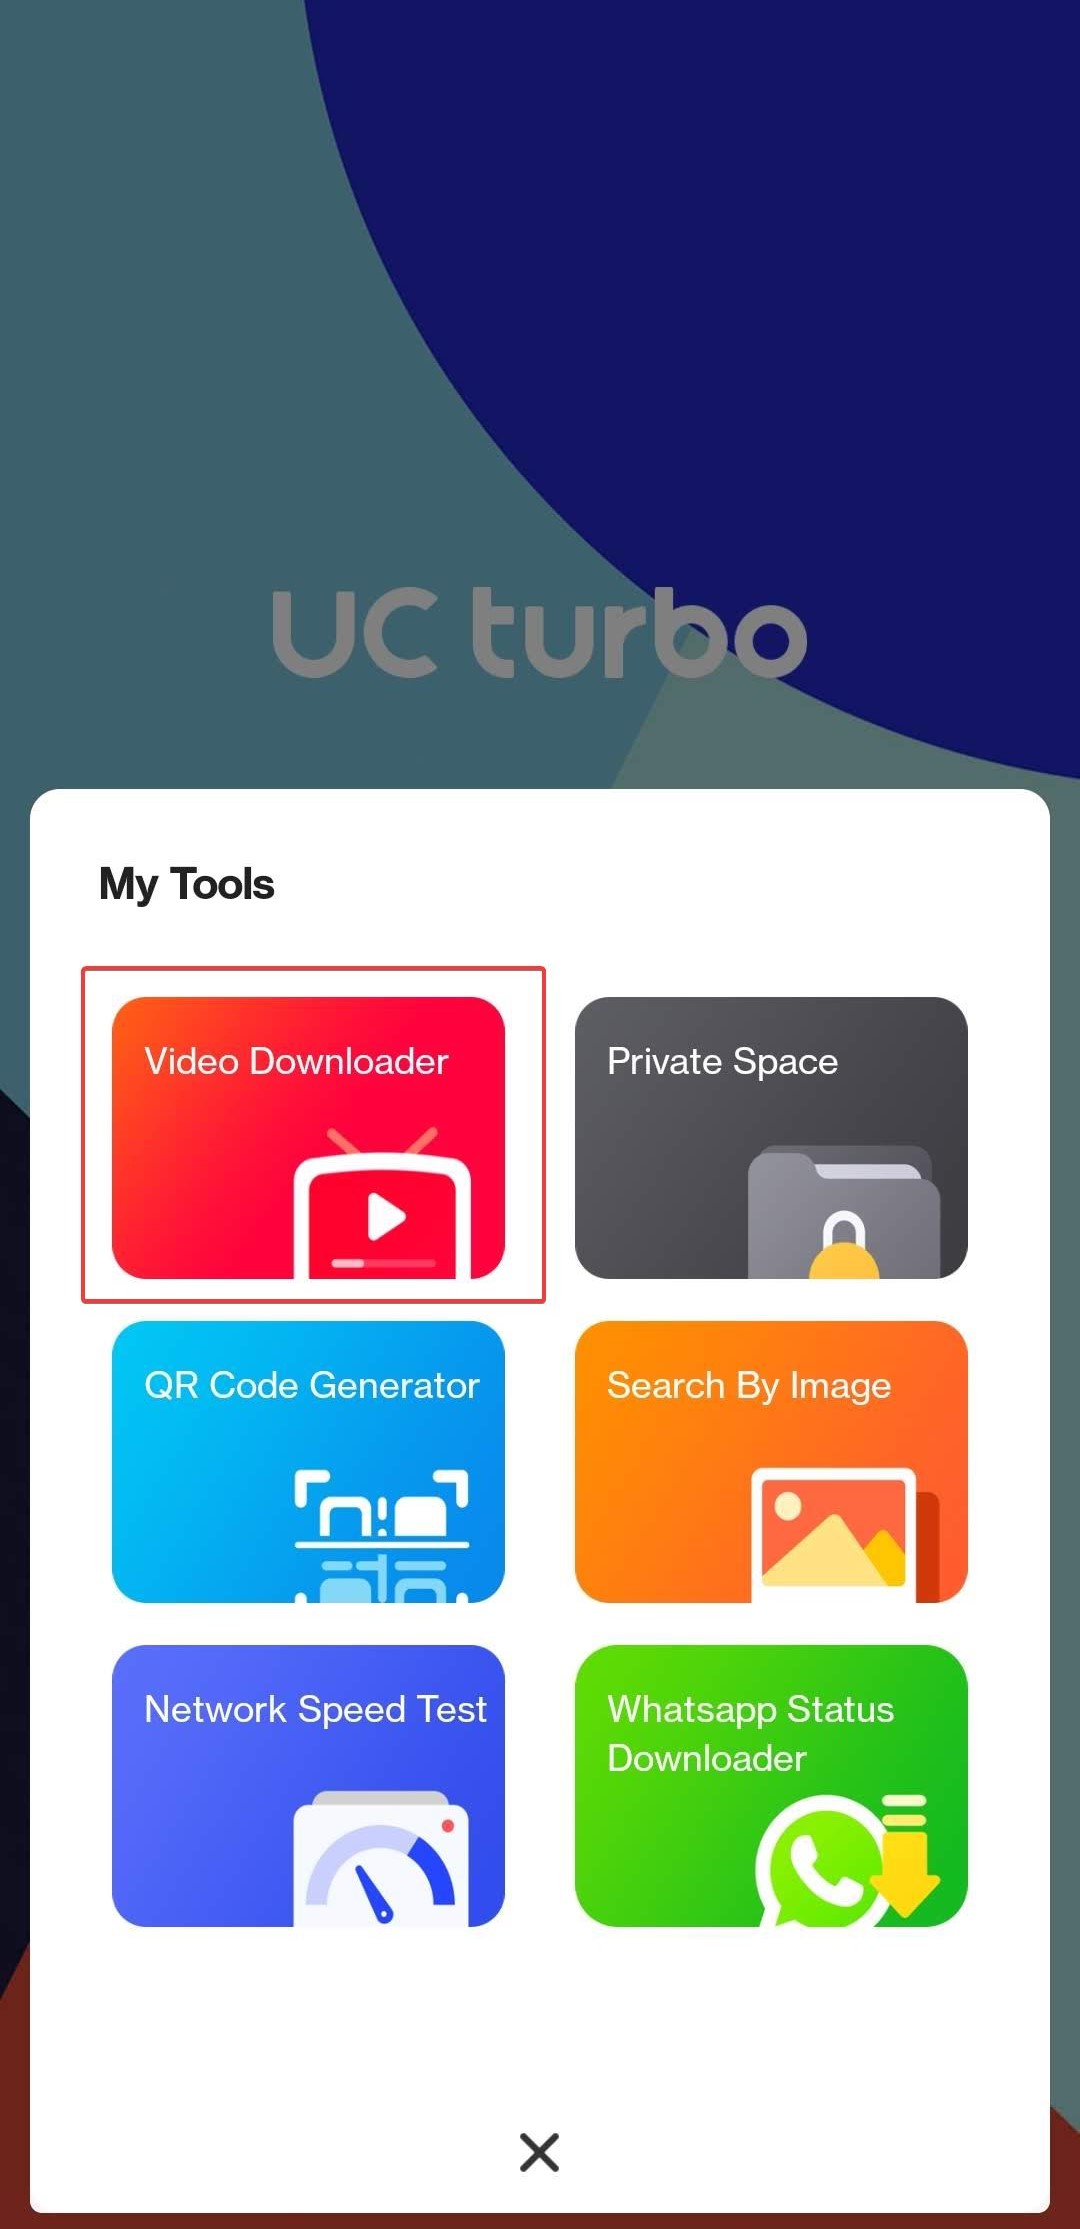 Open the UC Turbo Video Downloader.